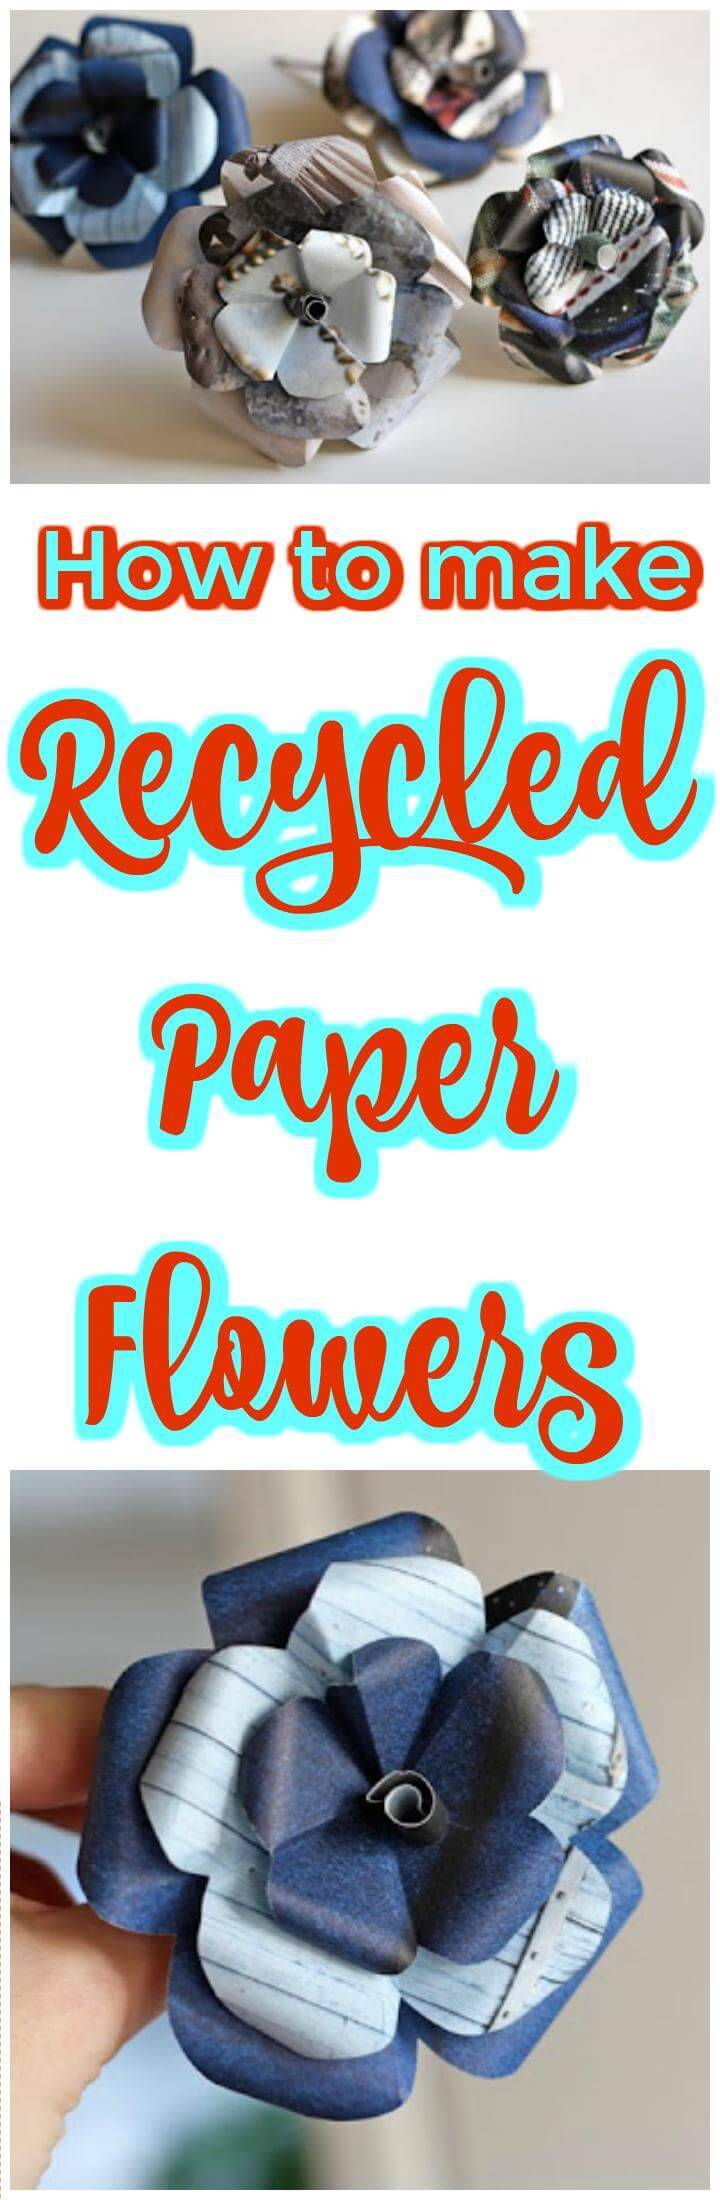 self-made recycled paper flowers